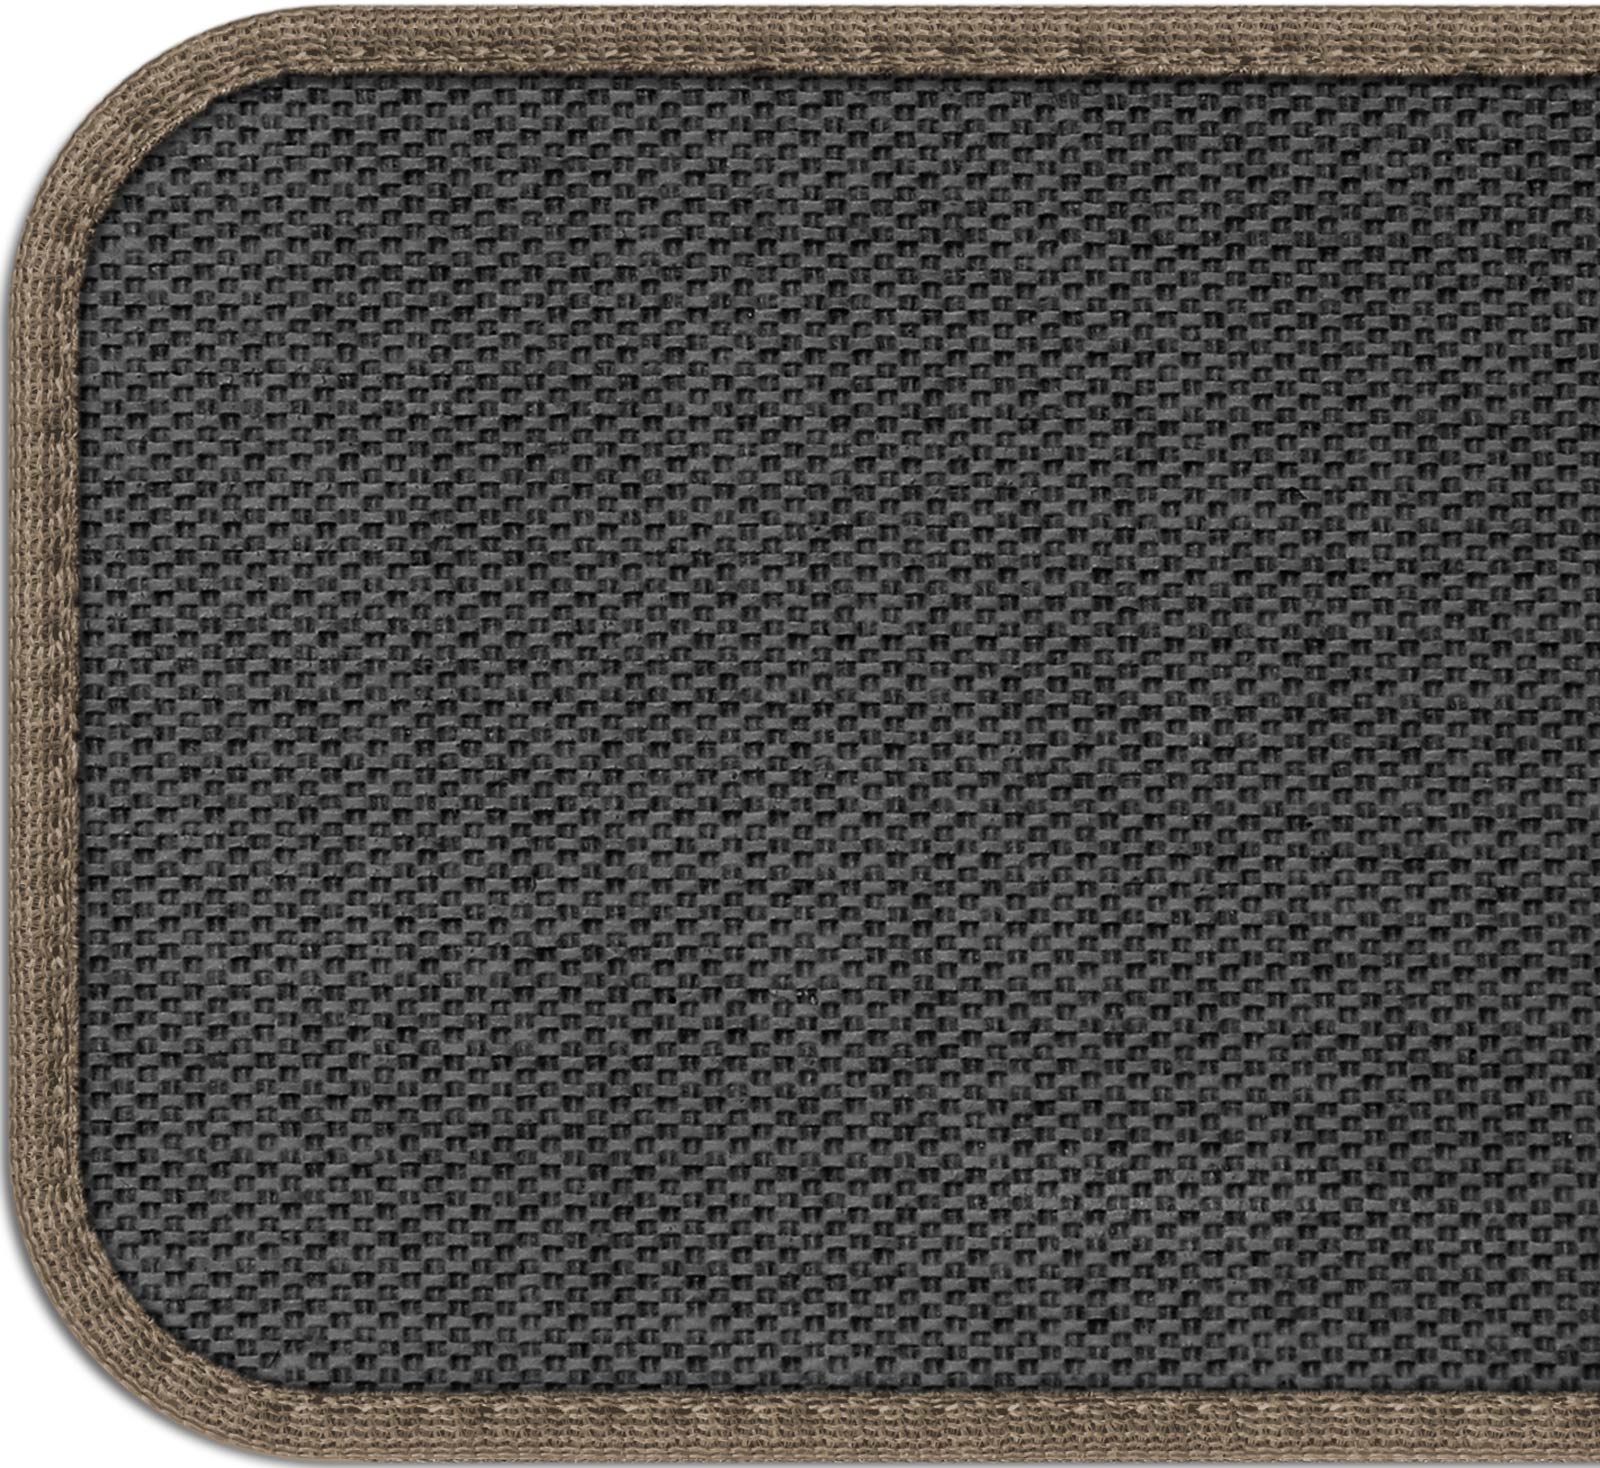 House, Home and More Set of 15 Skid-resistant Carpet Stair Treads - Pebble Beige - 8 In. X 30 In.